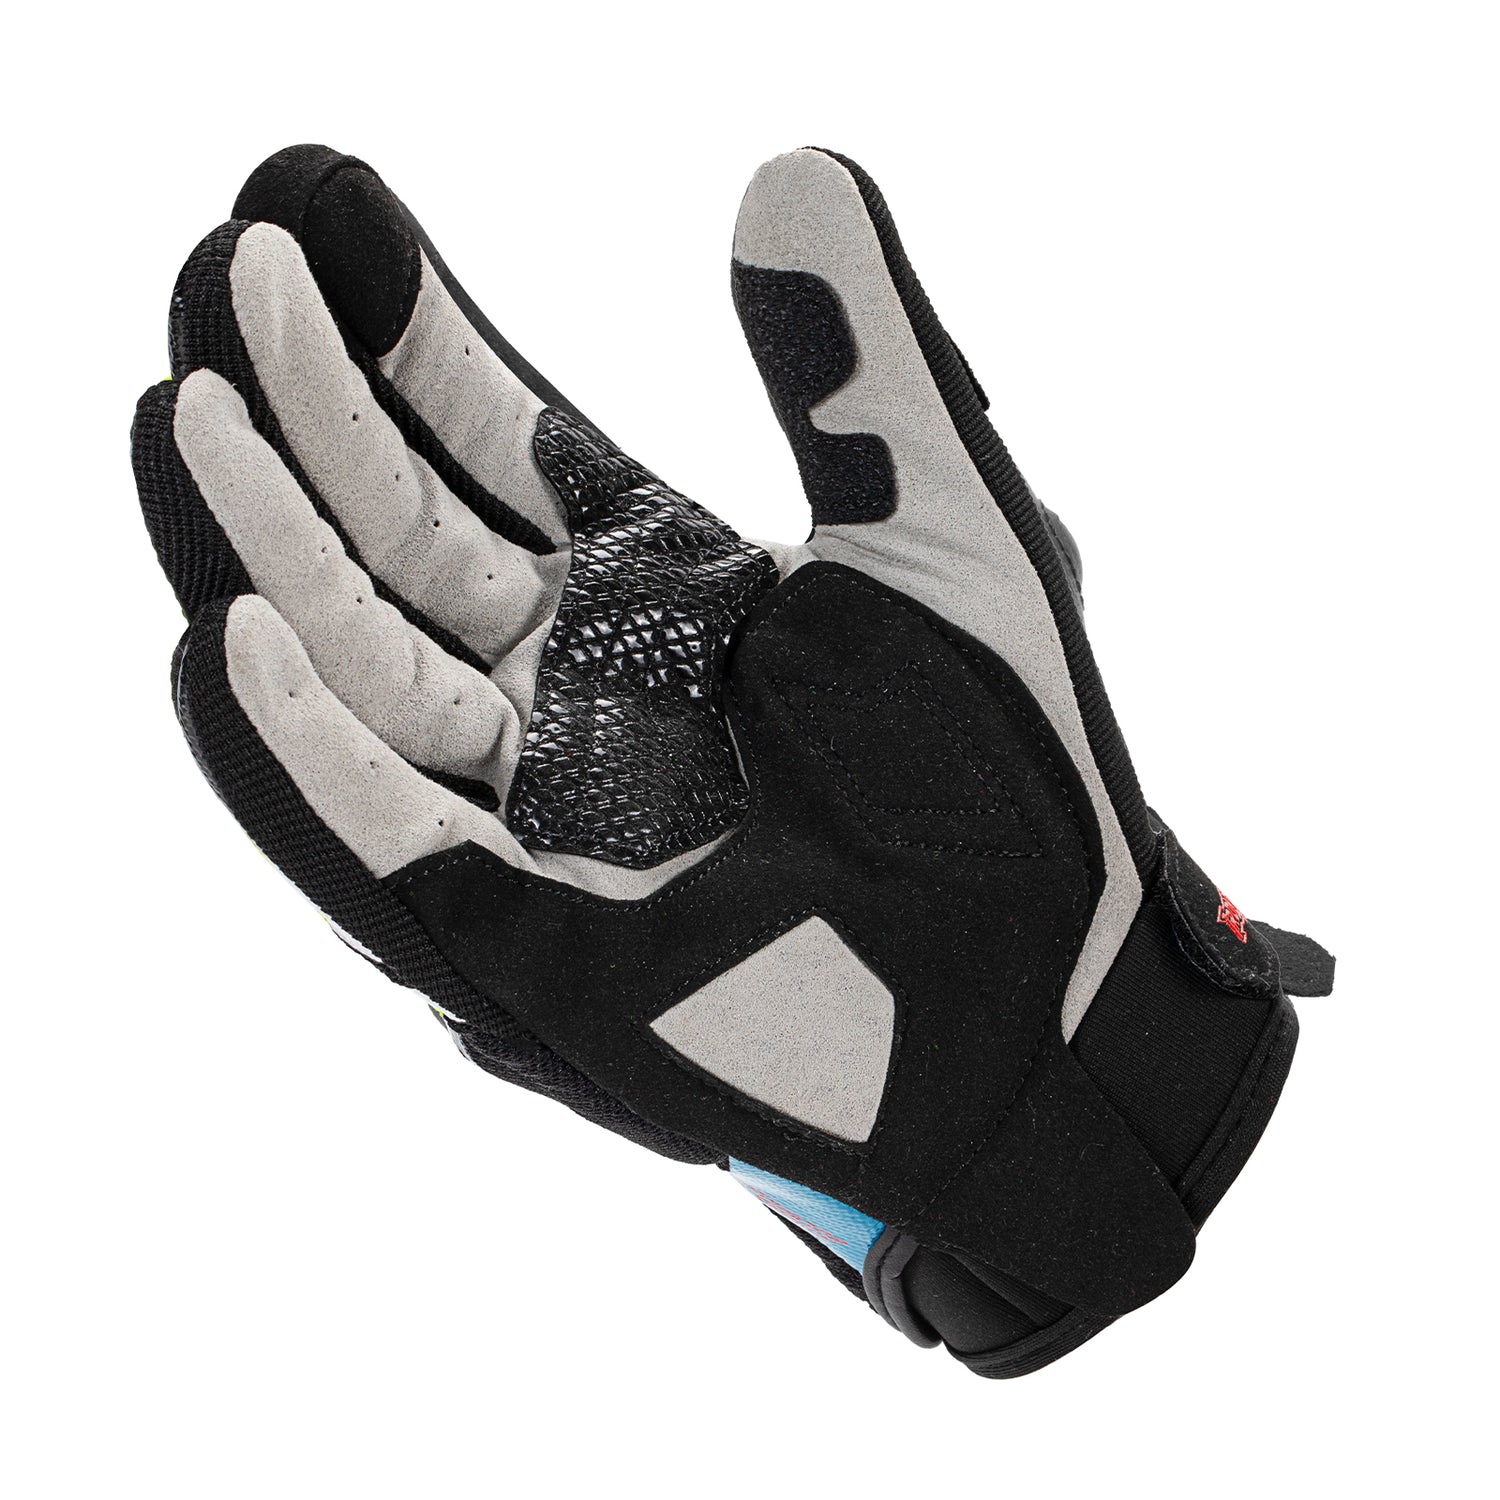 IRONJIAS Summer Breathable Motorcycle Protective Gloves